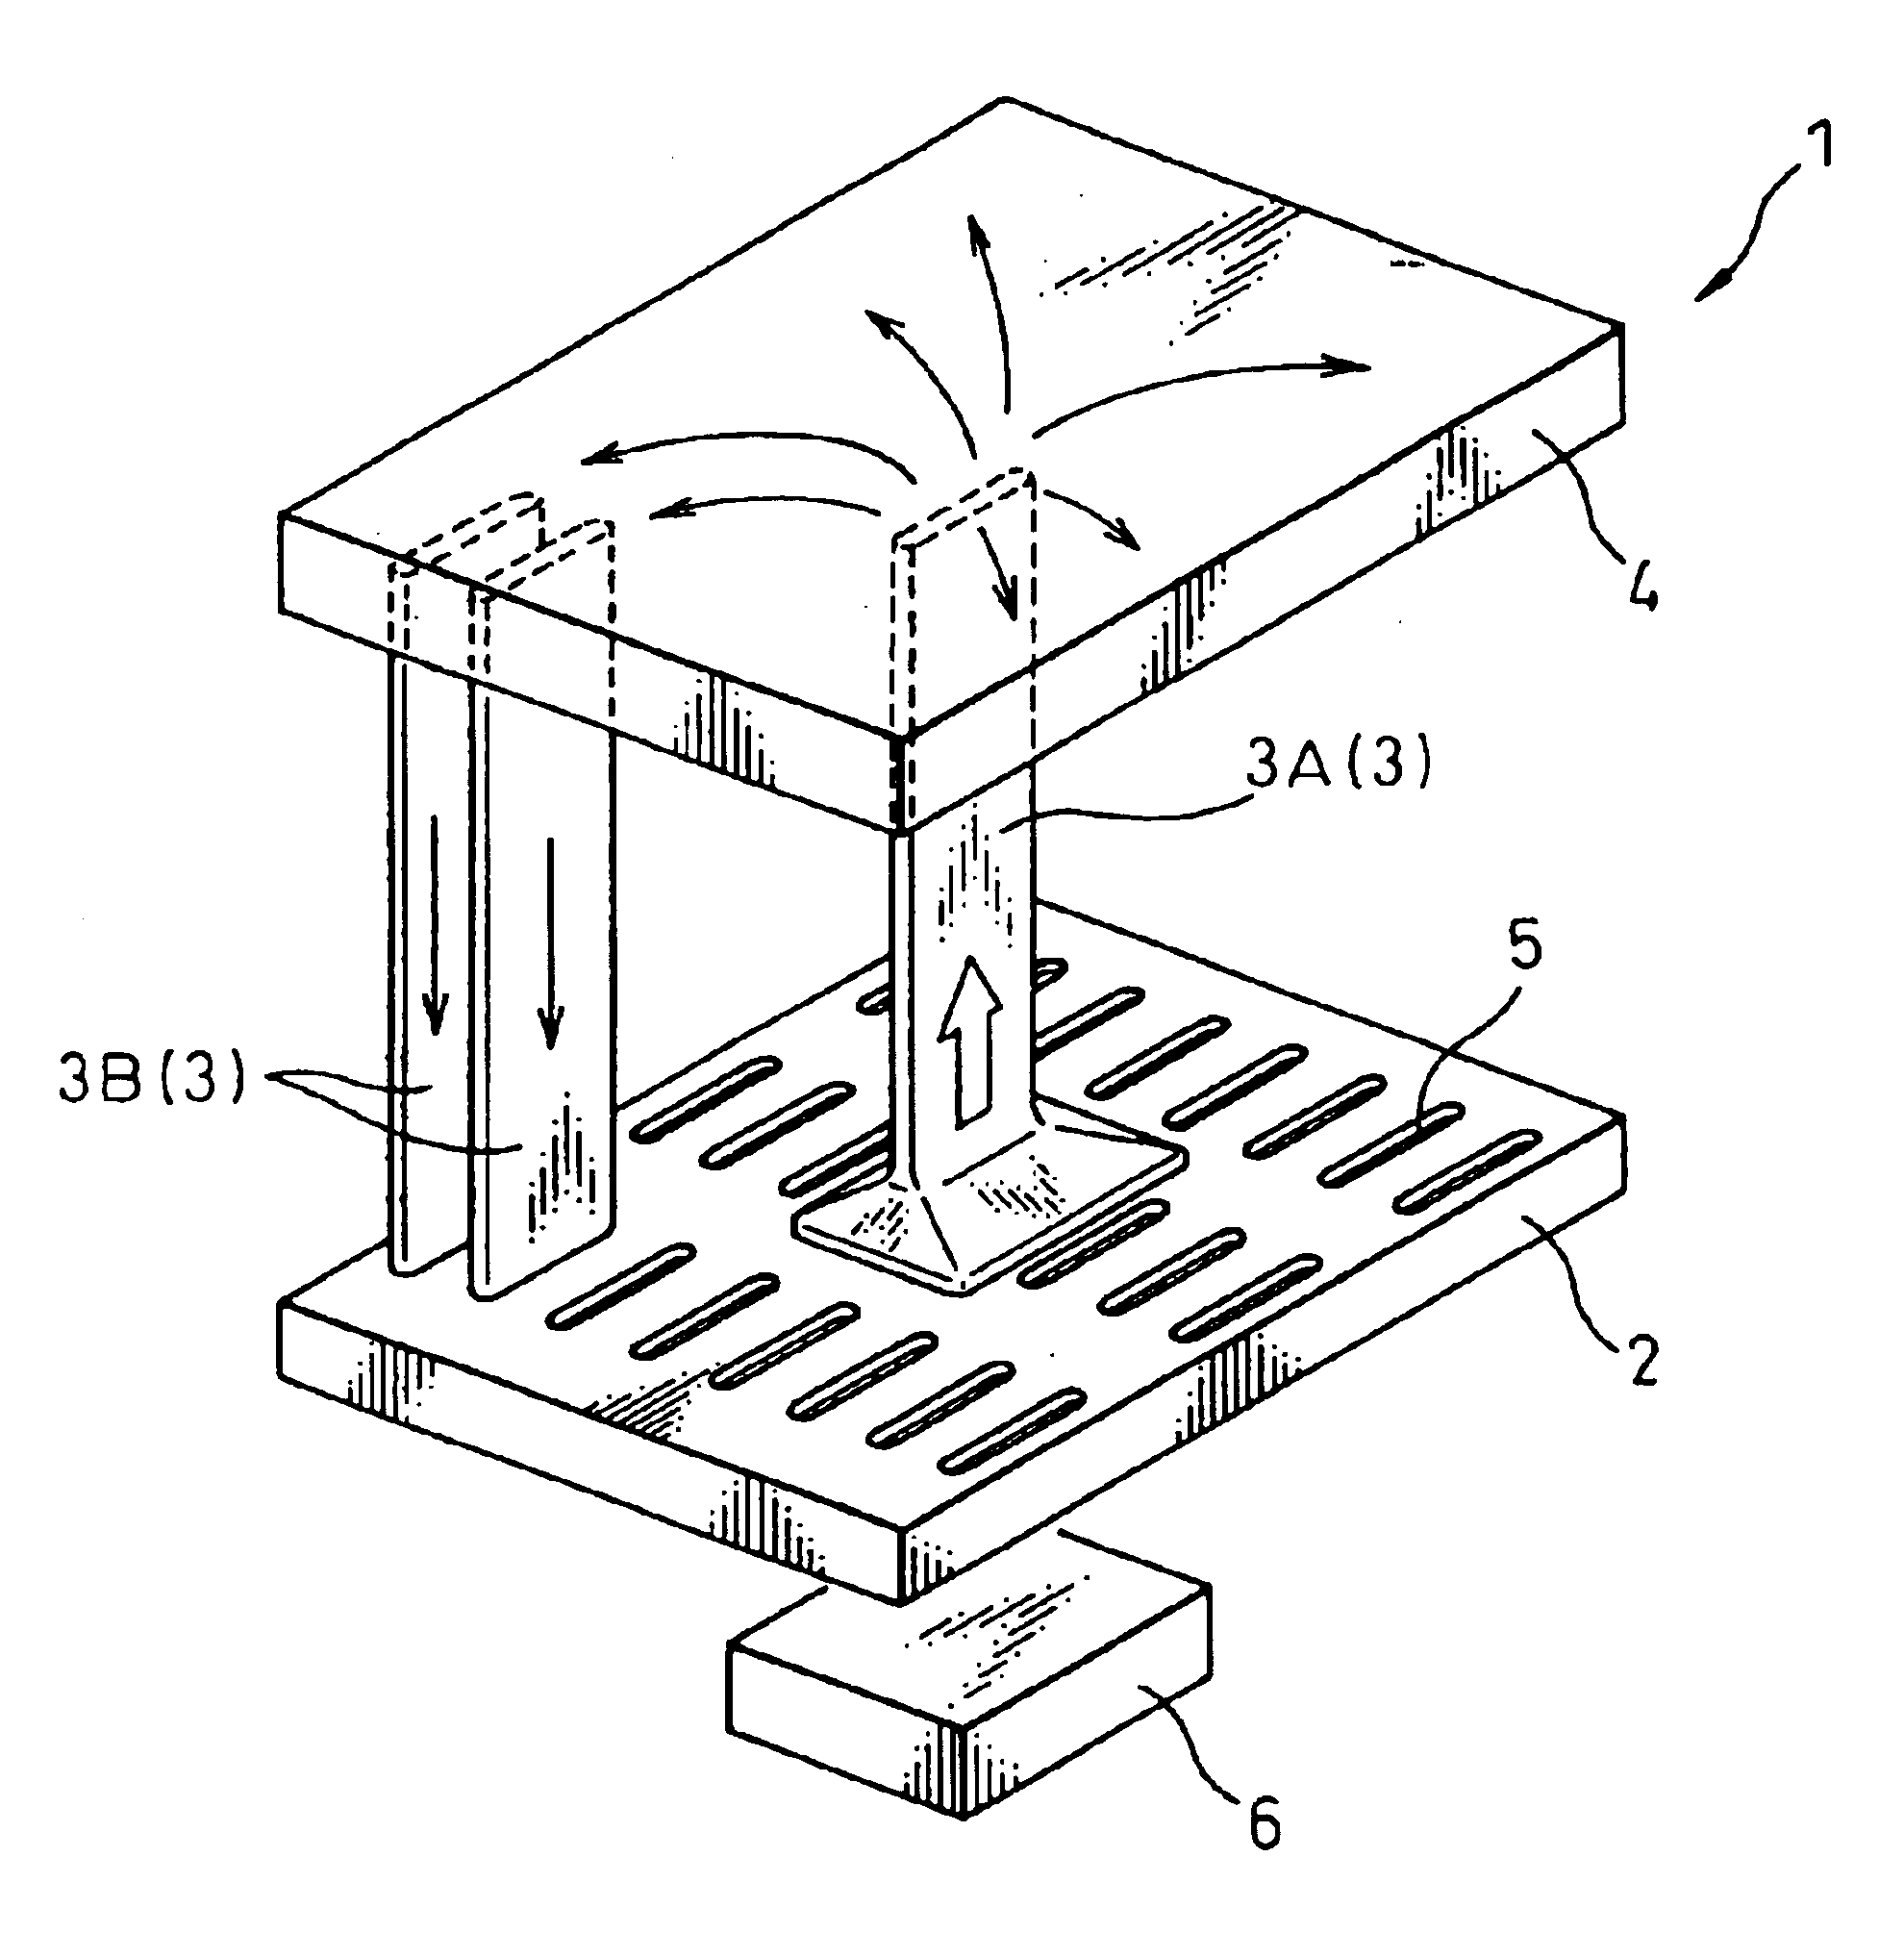 Cooling apparatus boiling and condensing refrigerant with a refrigerant vapor passage having a large cross sectional area